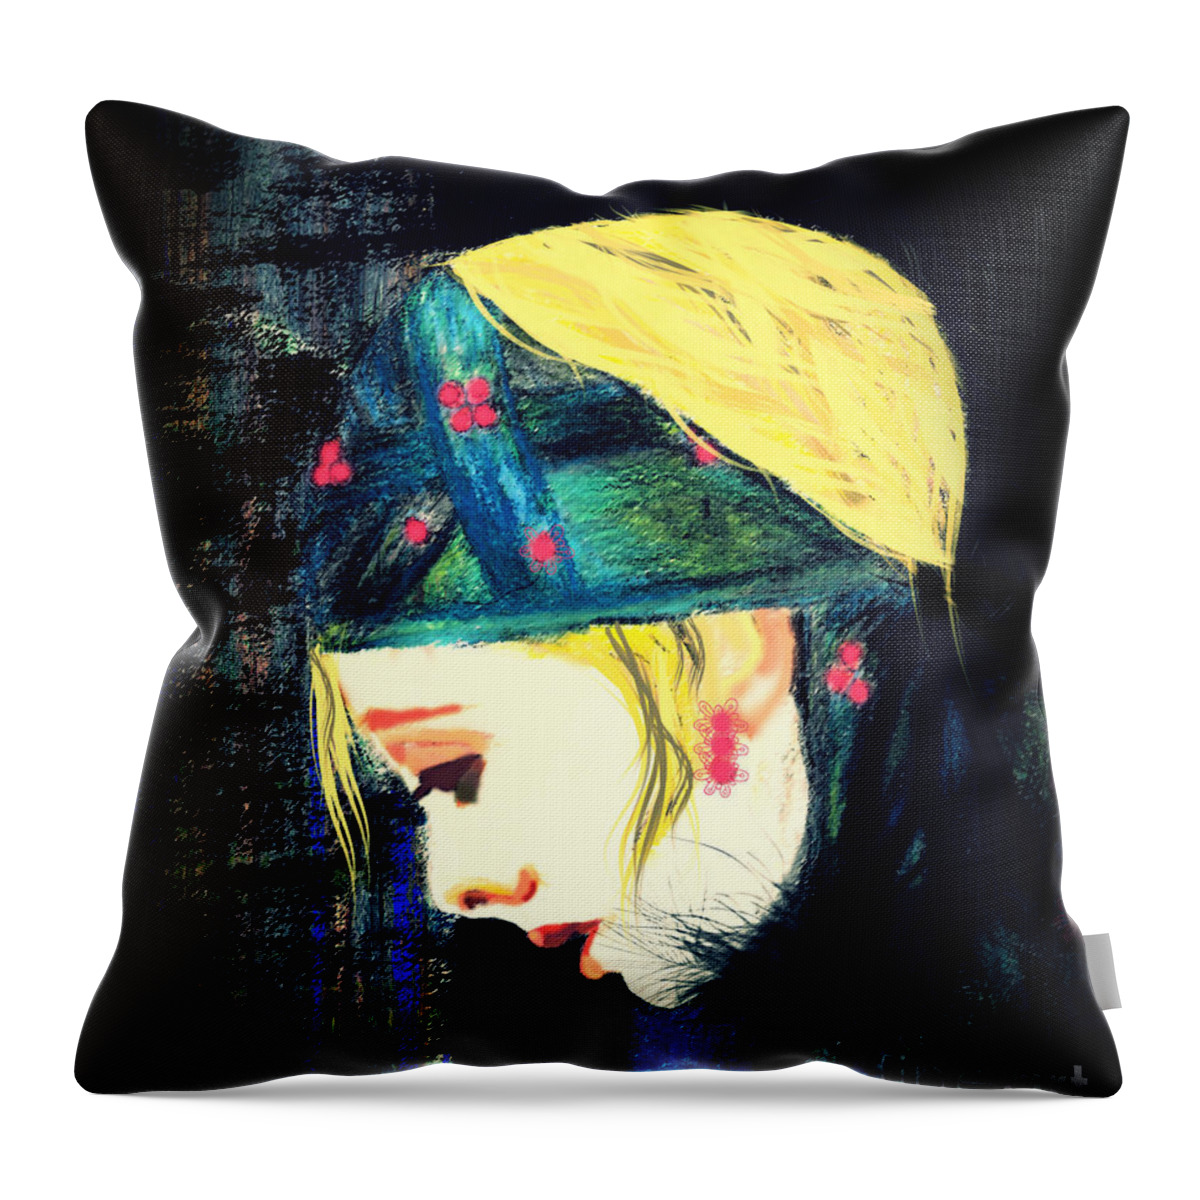 Portrait Throw Pillow featuring the mixed media Daisy by Kim Prowse